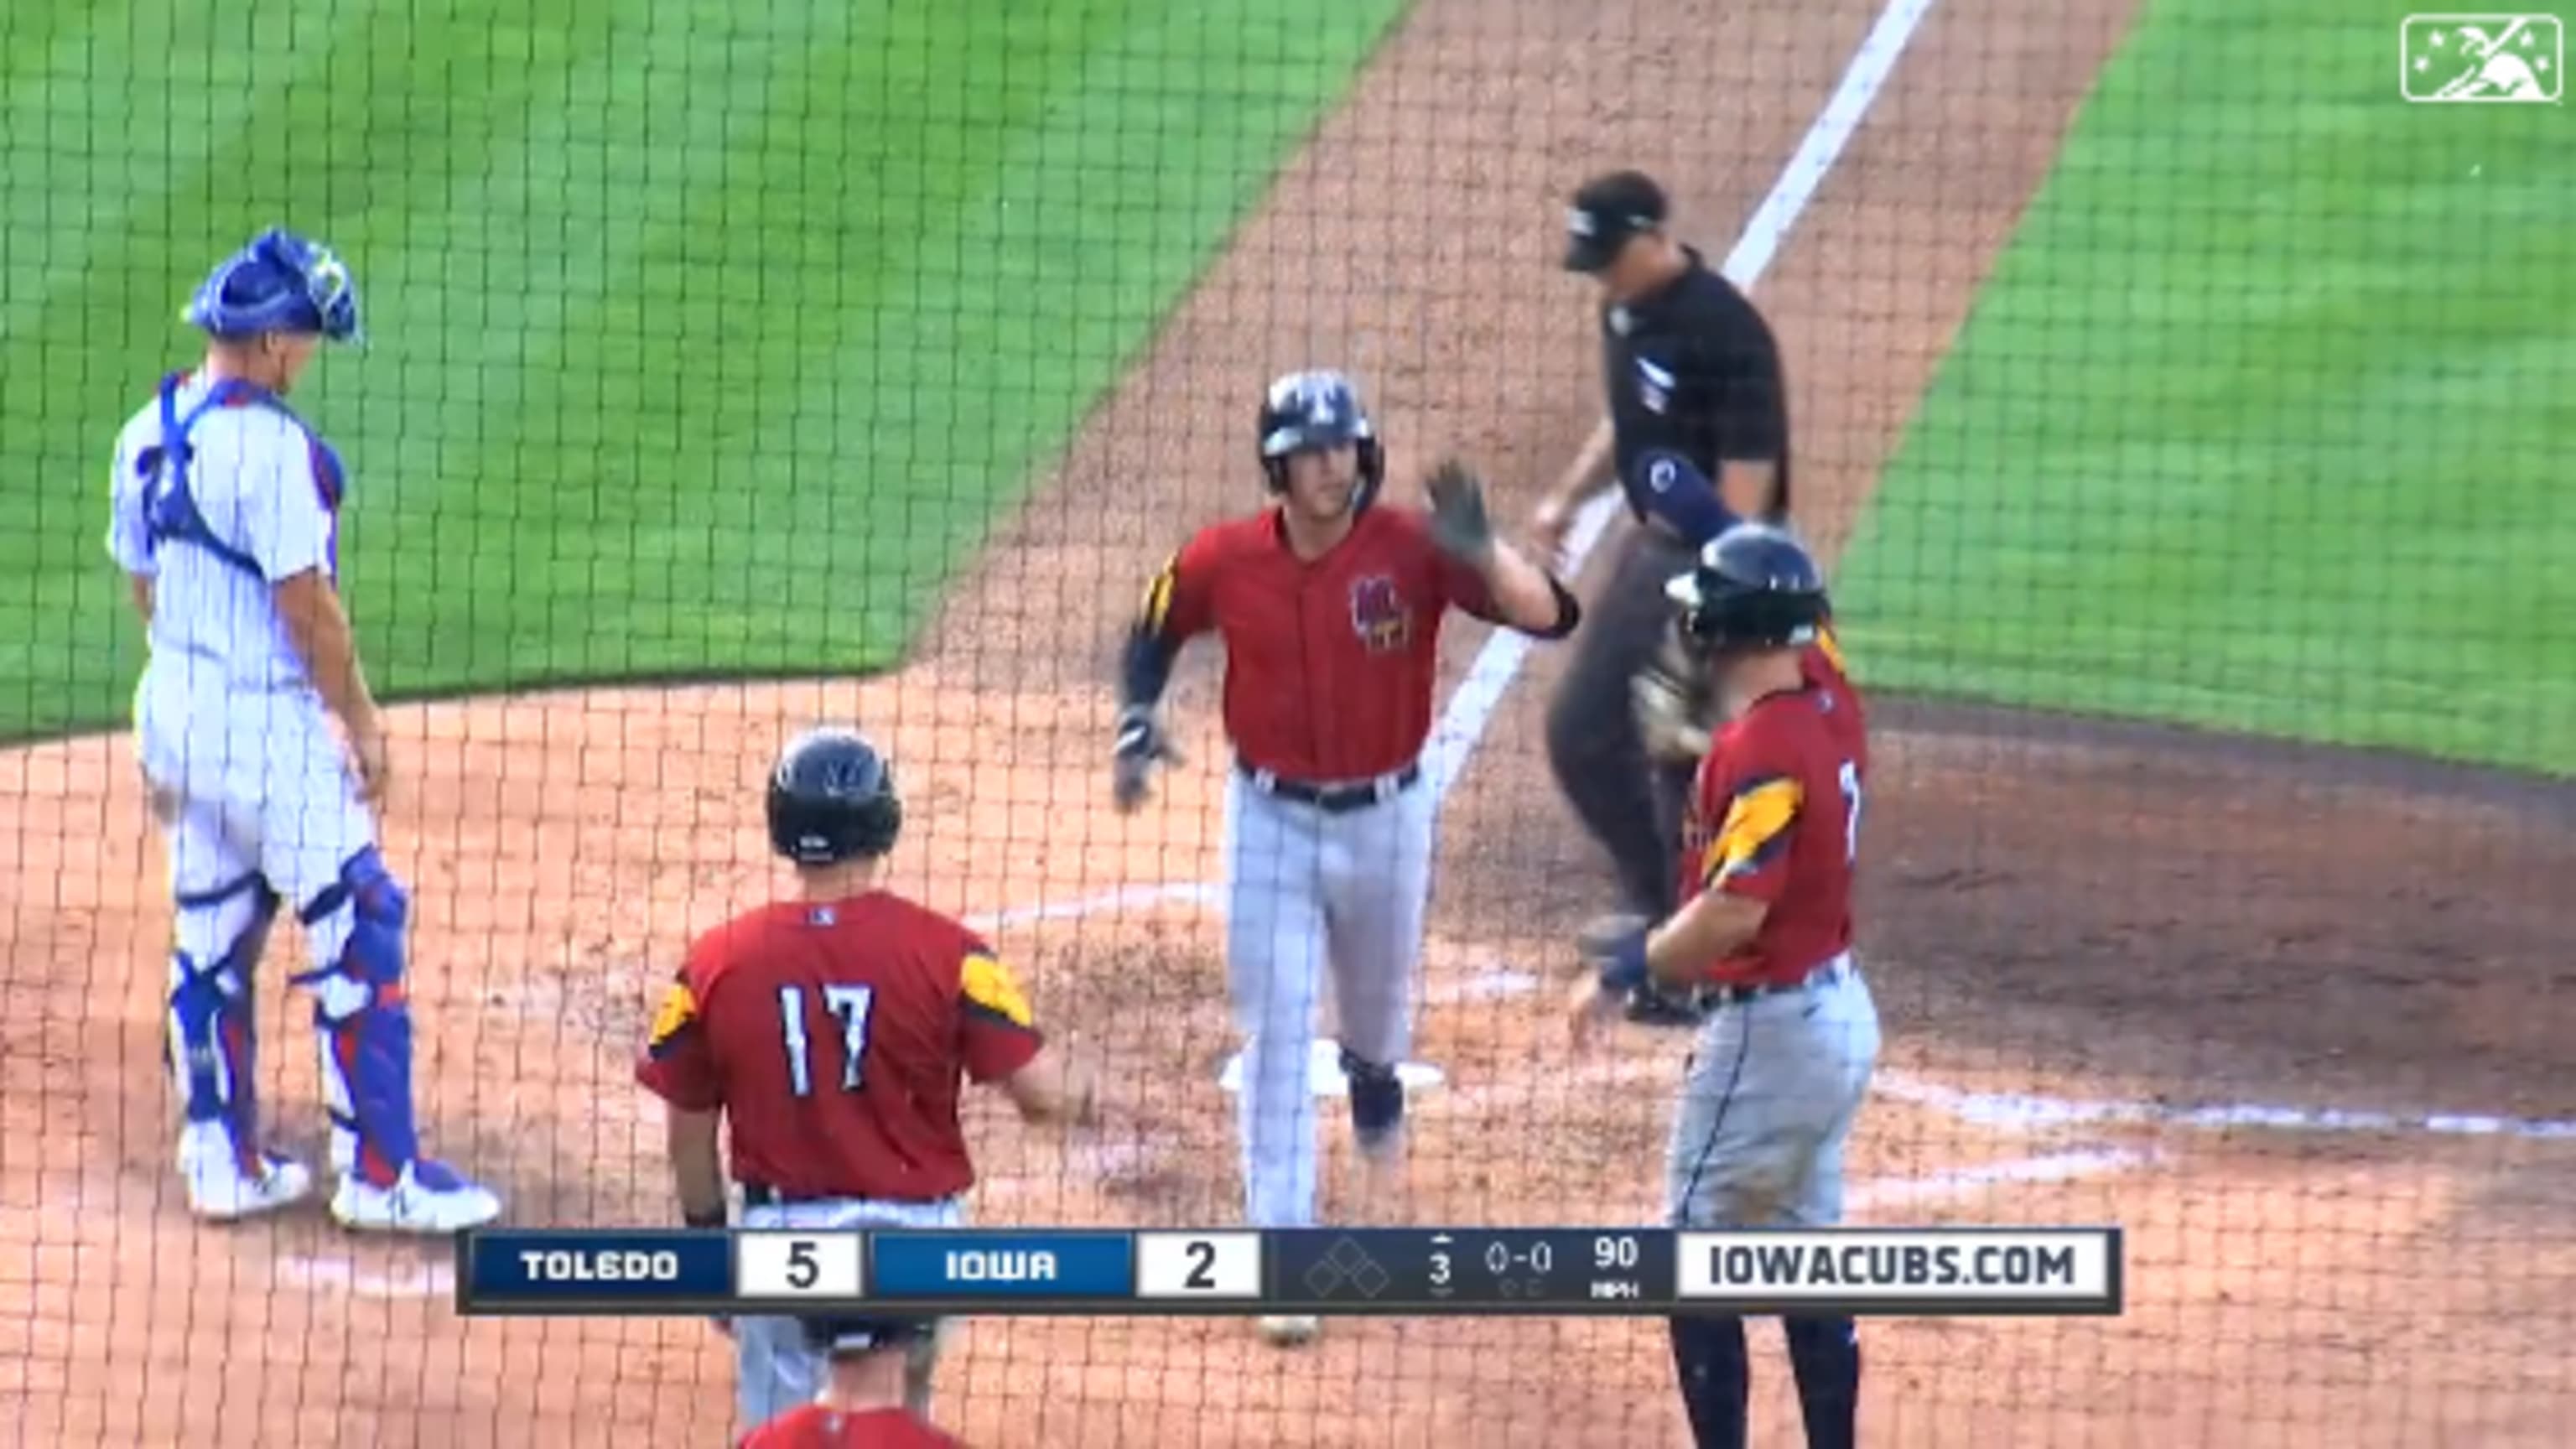 Detroit's top prospect Spencer Torkelson slams two 3-run homers in